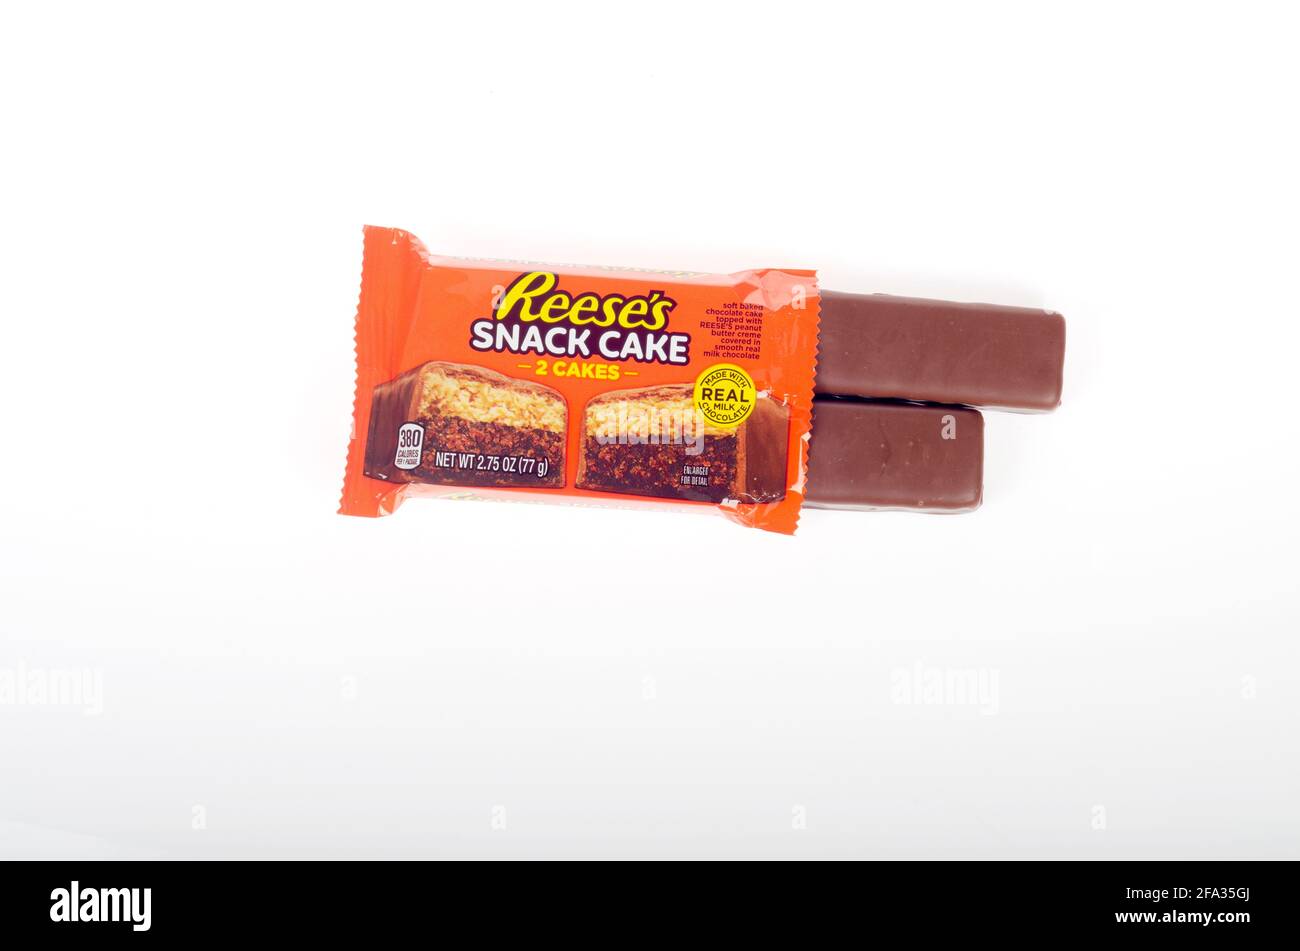 Reese’s Snack Cake Open Package Stock Photo